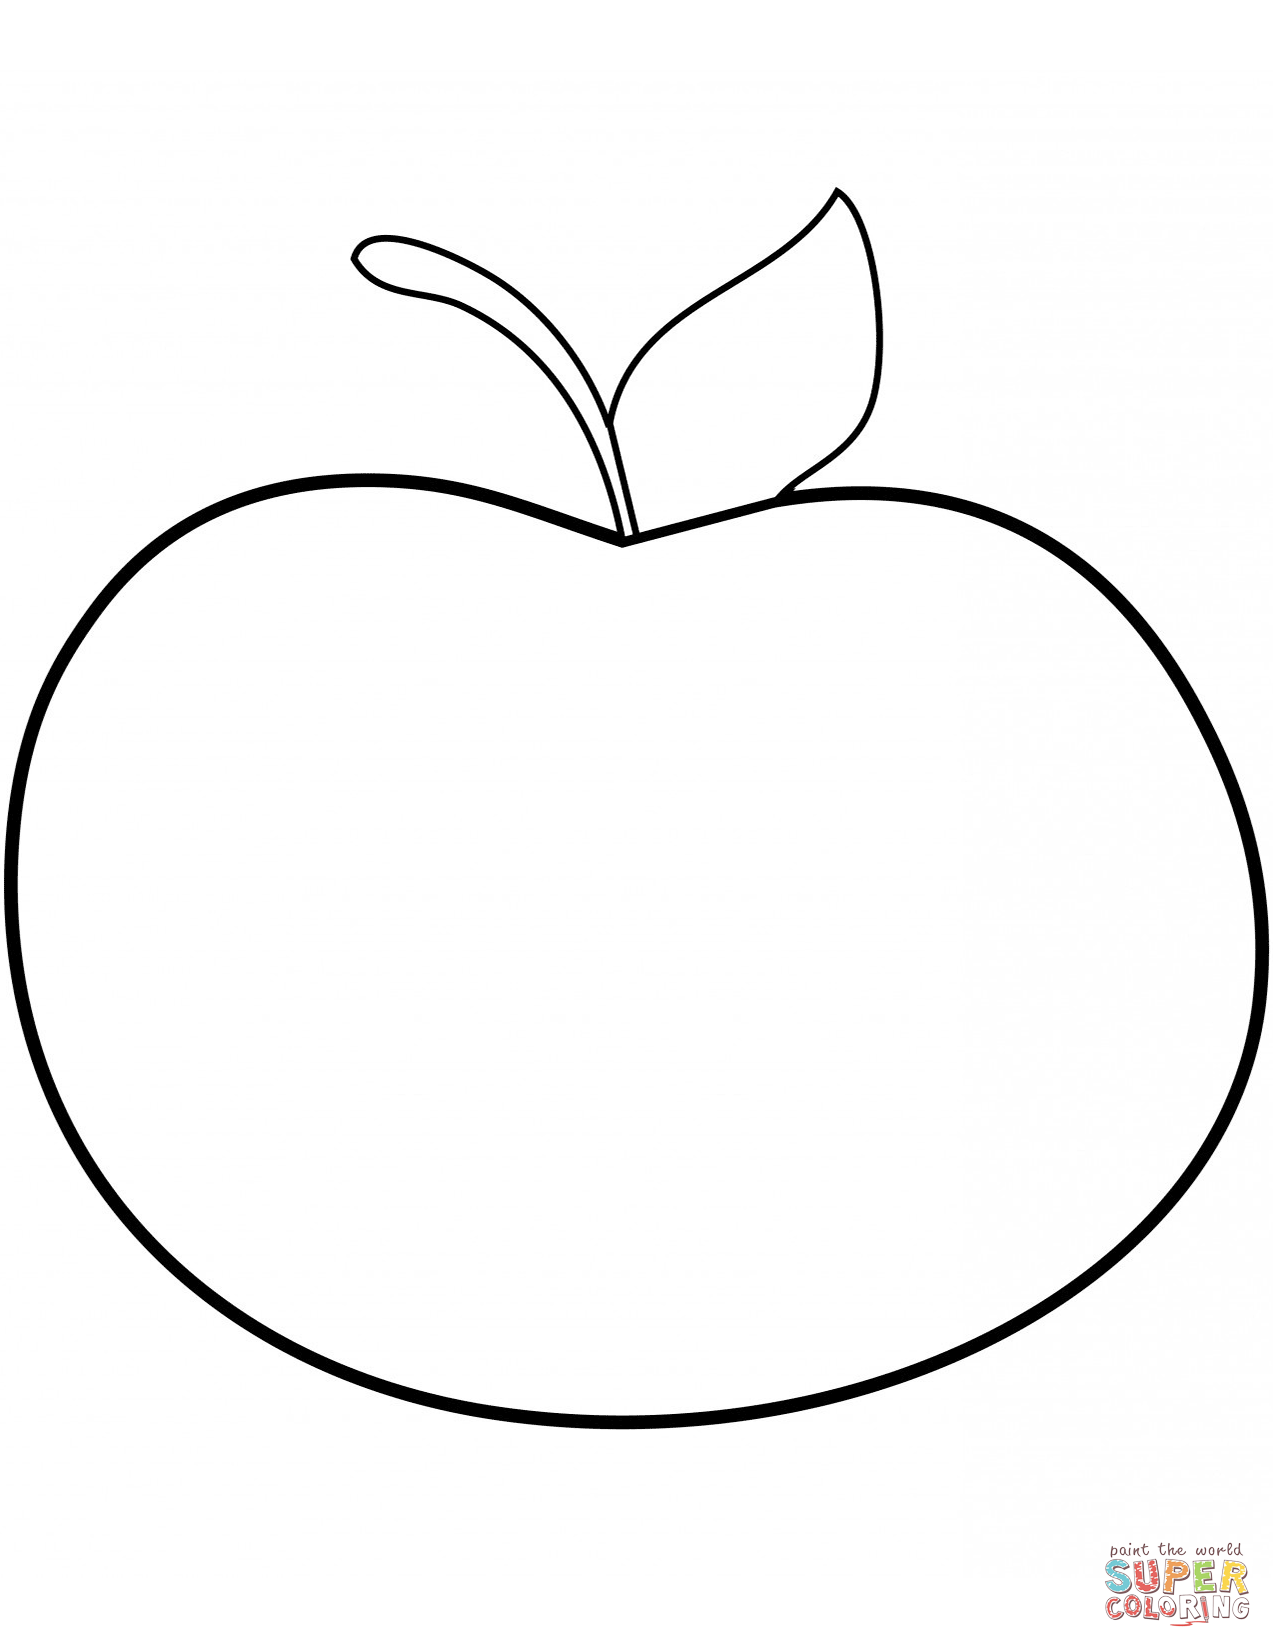 Download Apple Logo Coloring Pages at GetColorings.com | Free ...